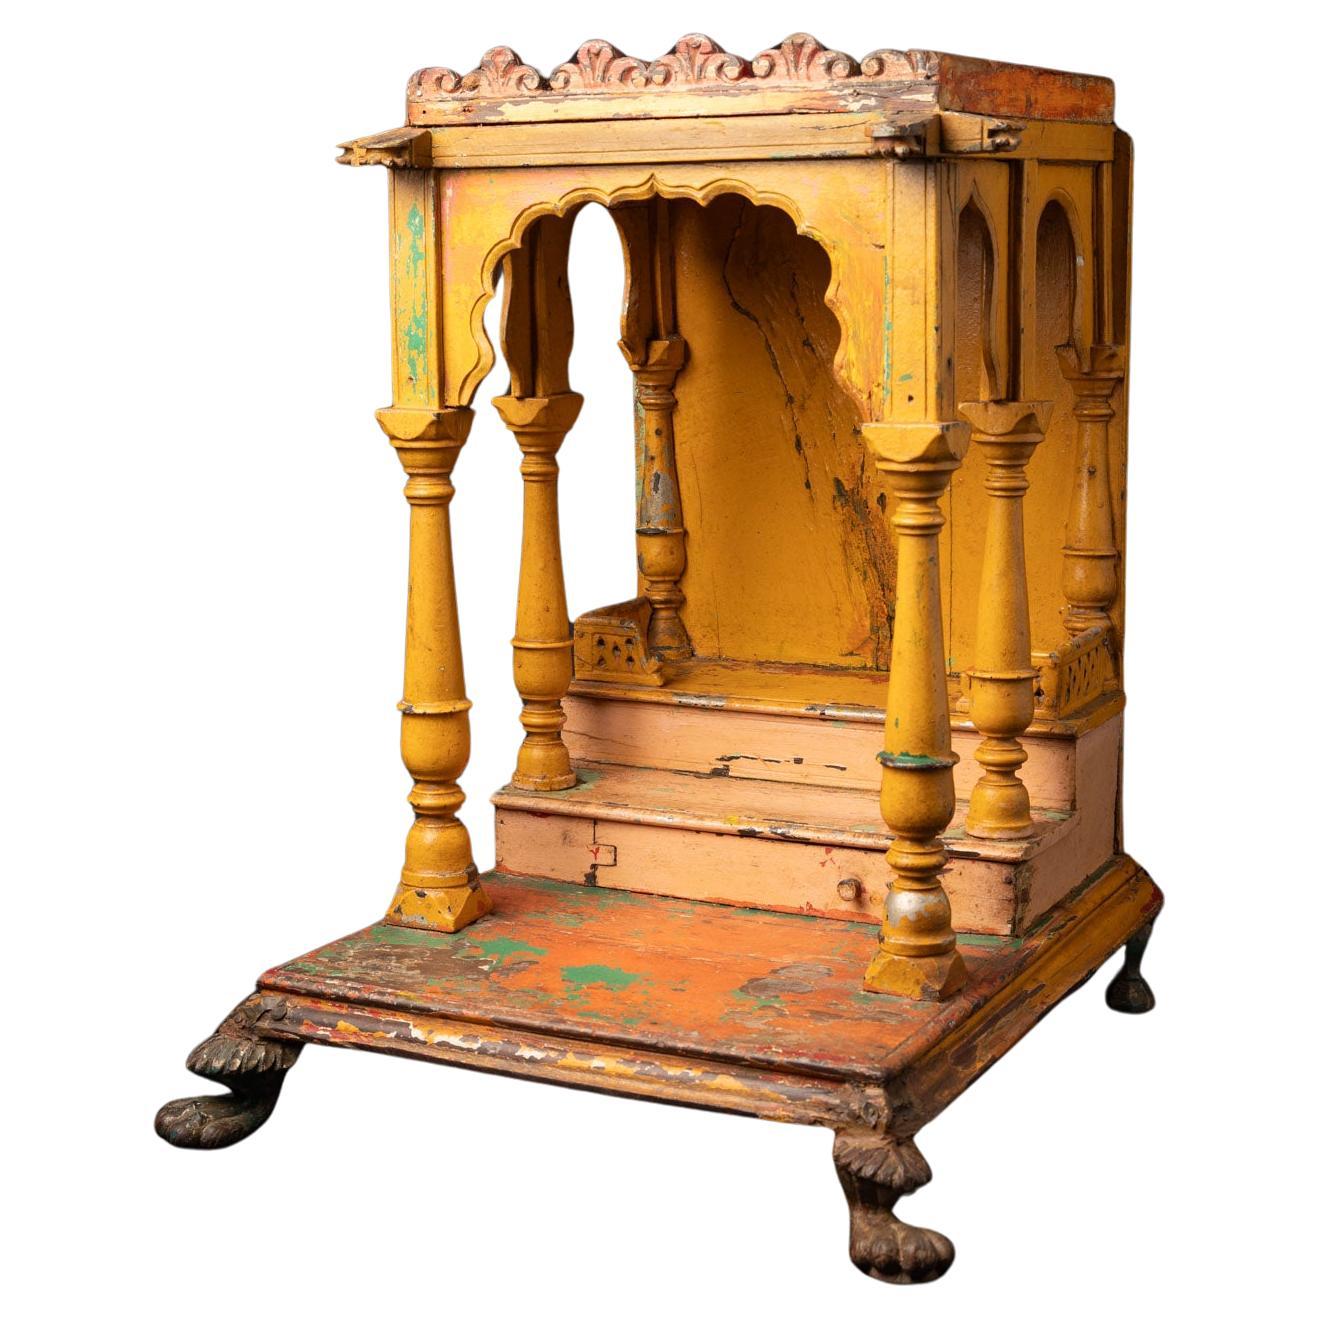 19th century Antique wooden Indian temple from India